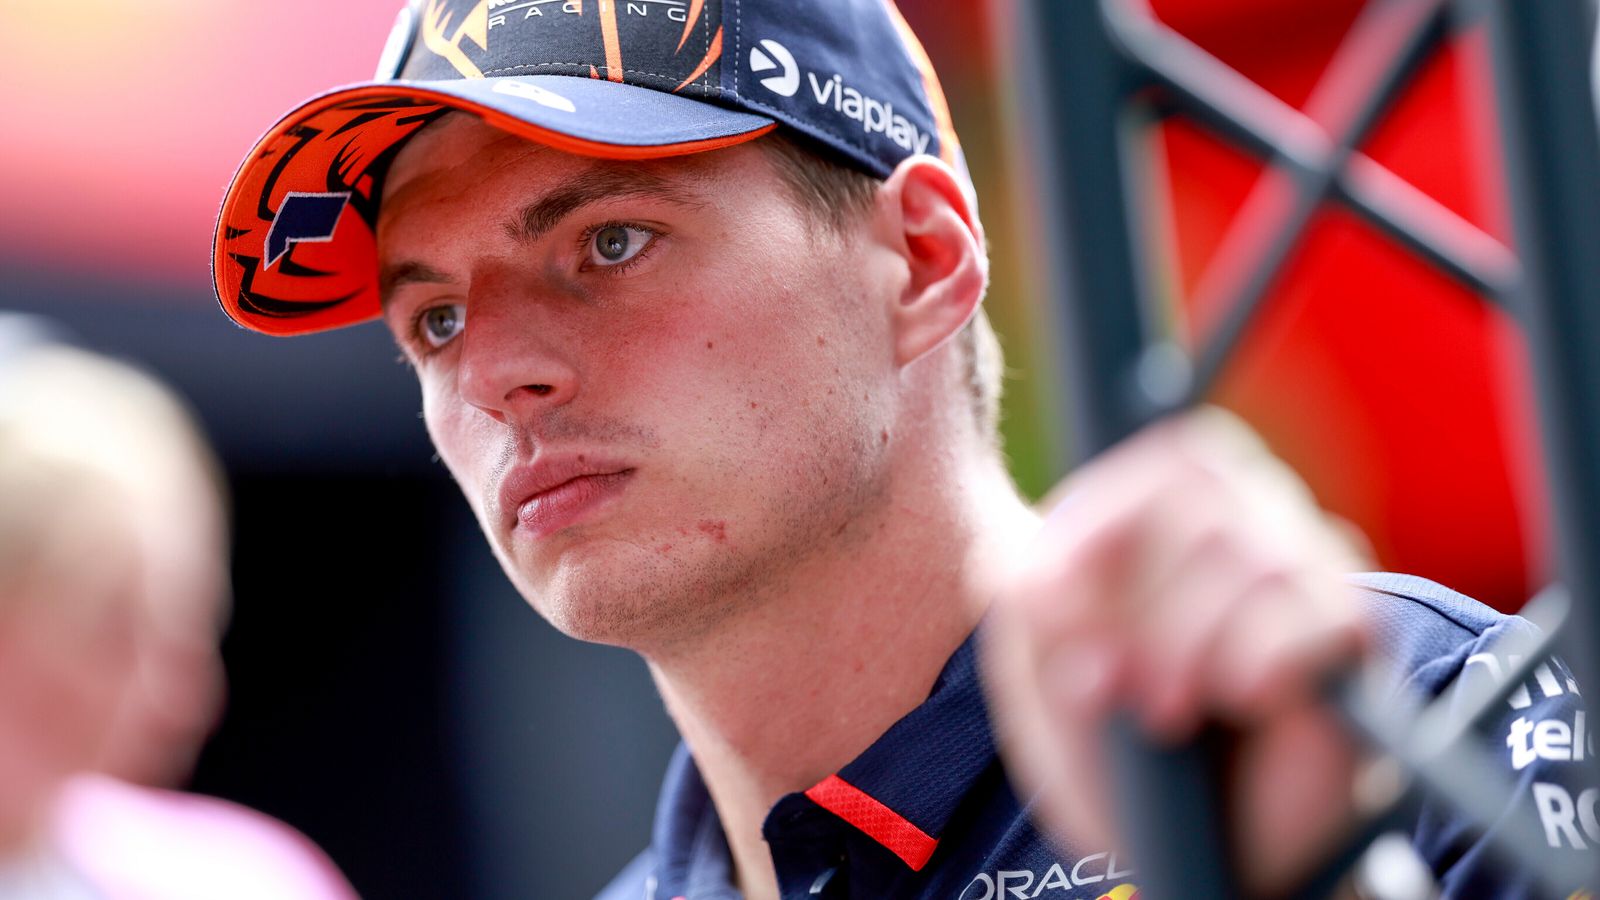 Formula 1: Red Bull’s Max Verstappen handed 10-place grid penalty at Belgian GP after exceeding engine limit | Formula 1 News